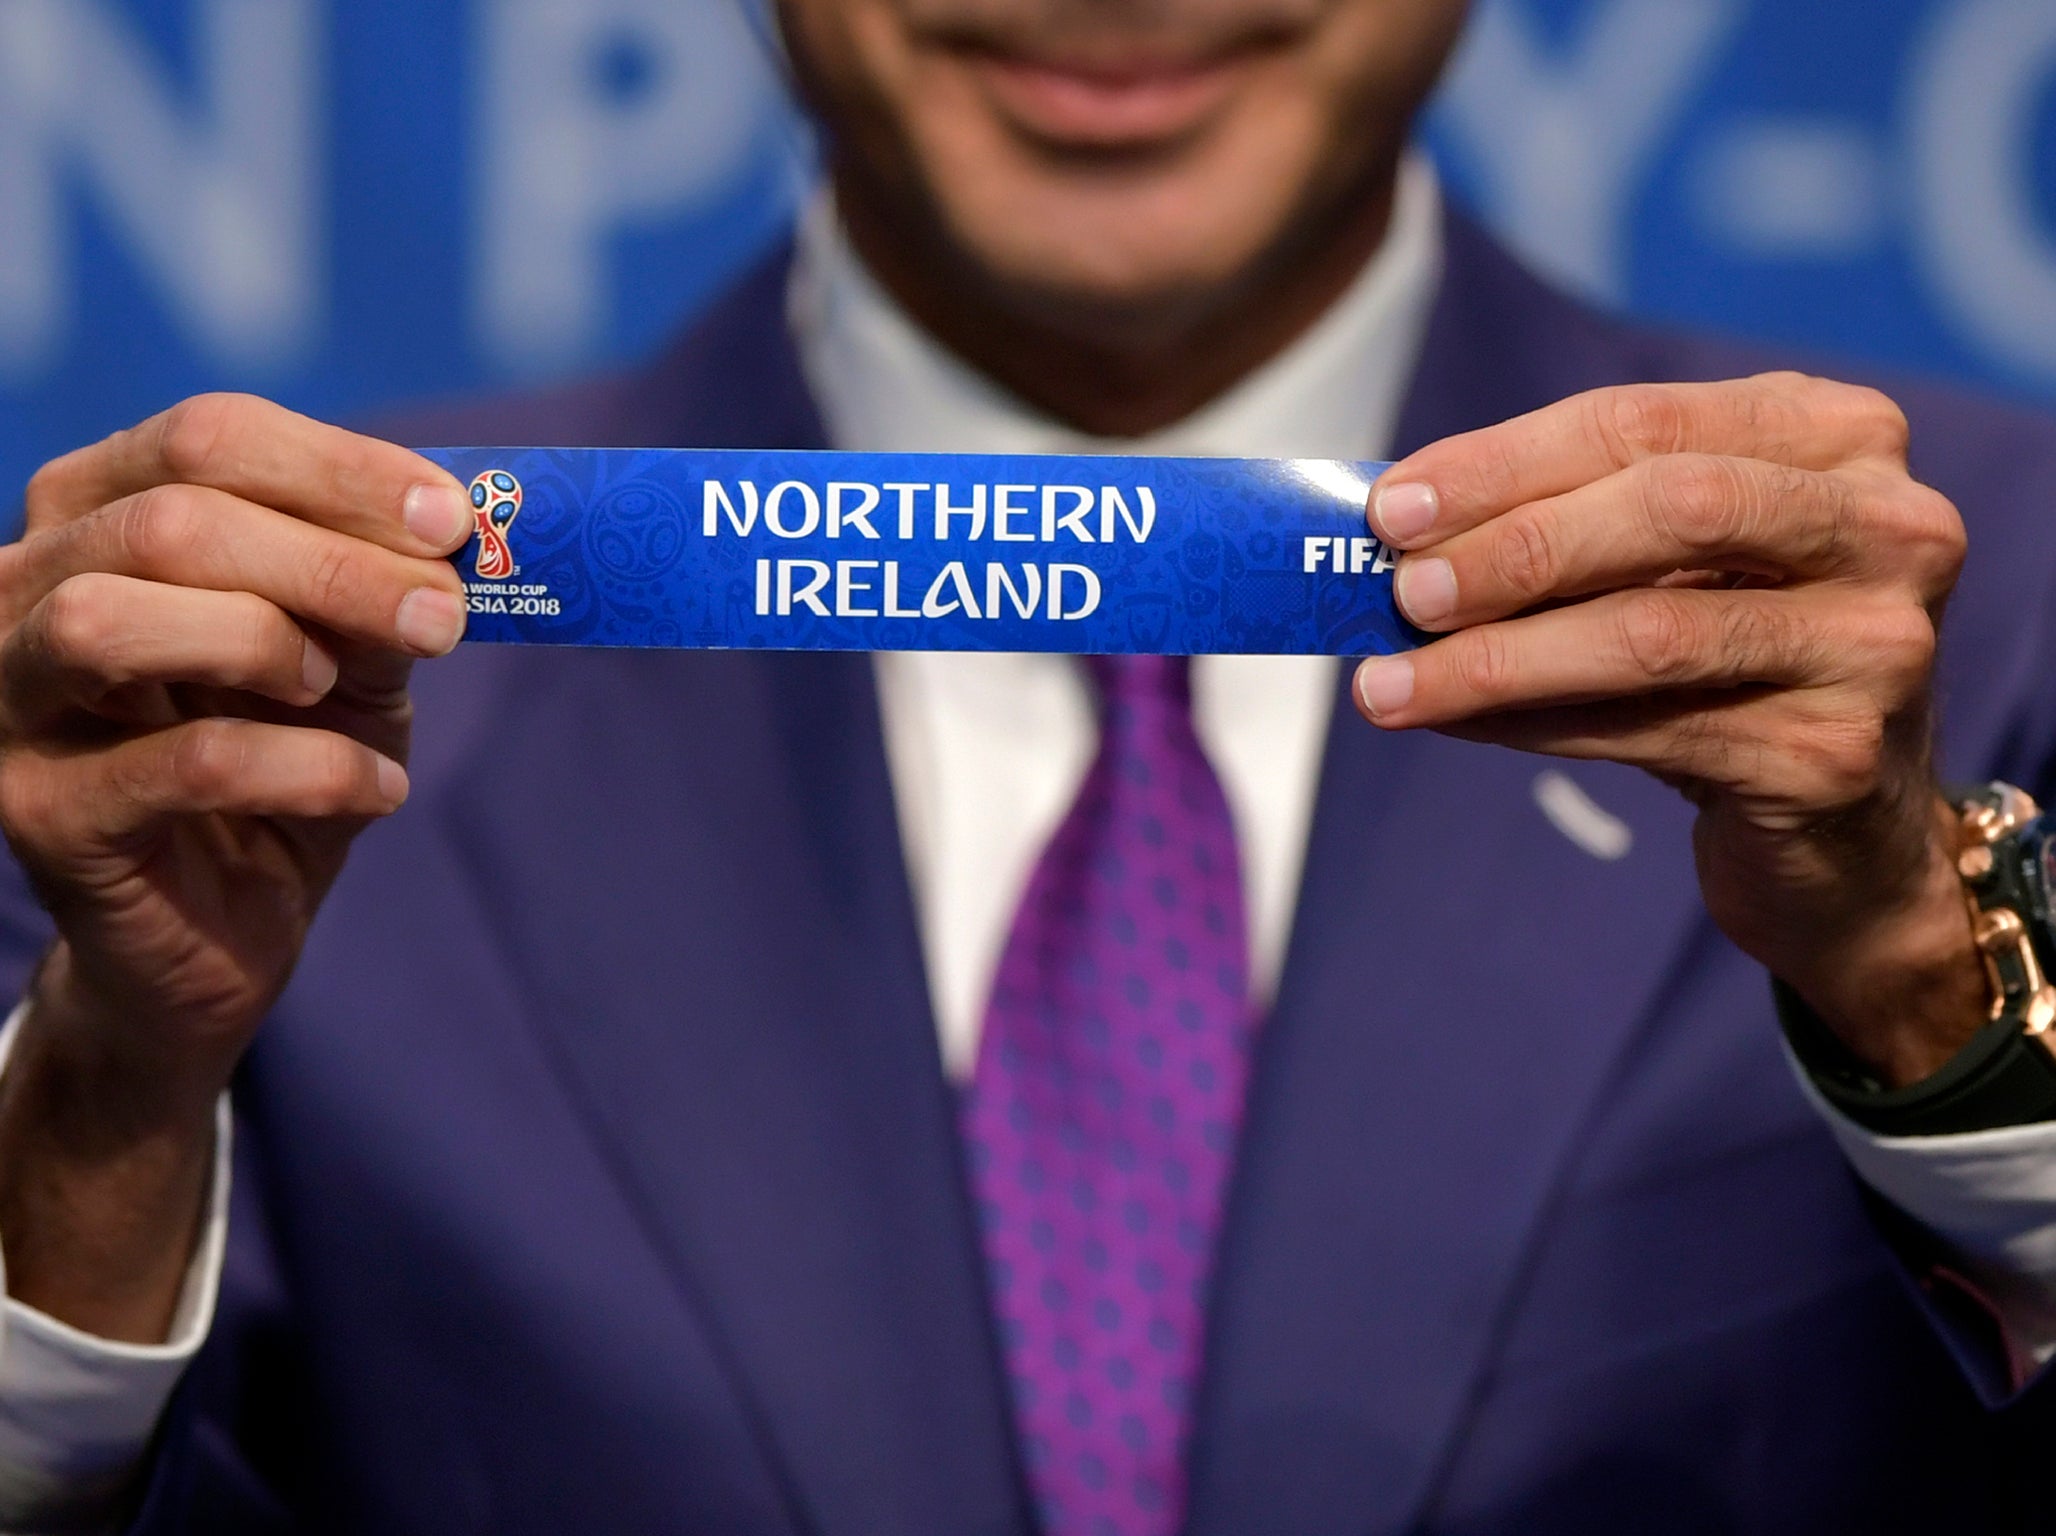 Northern Ireland were one of the eight countries in the draw